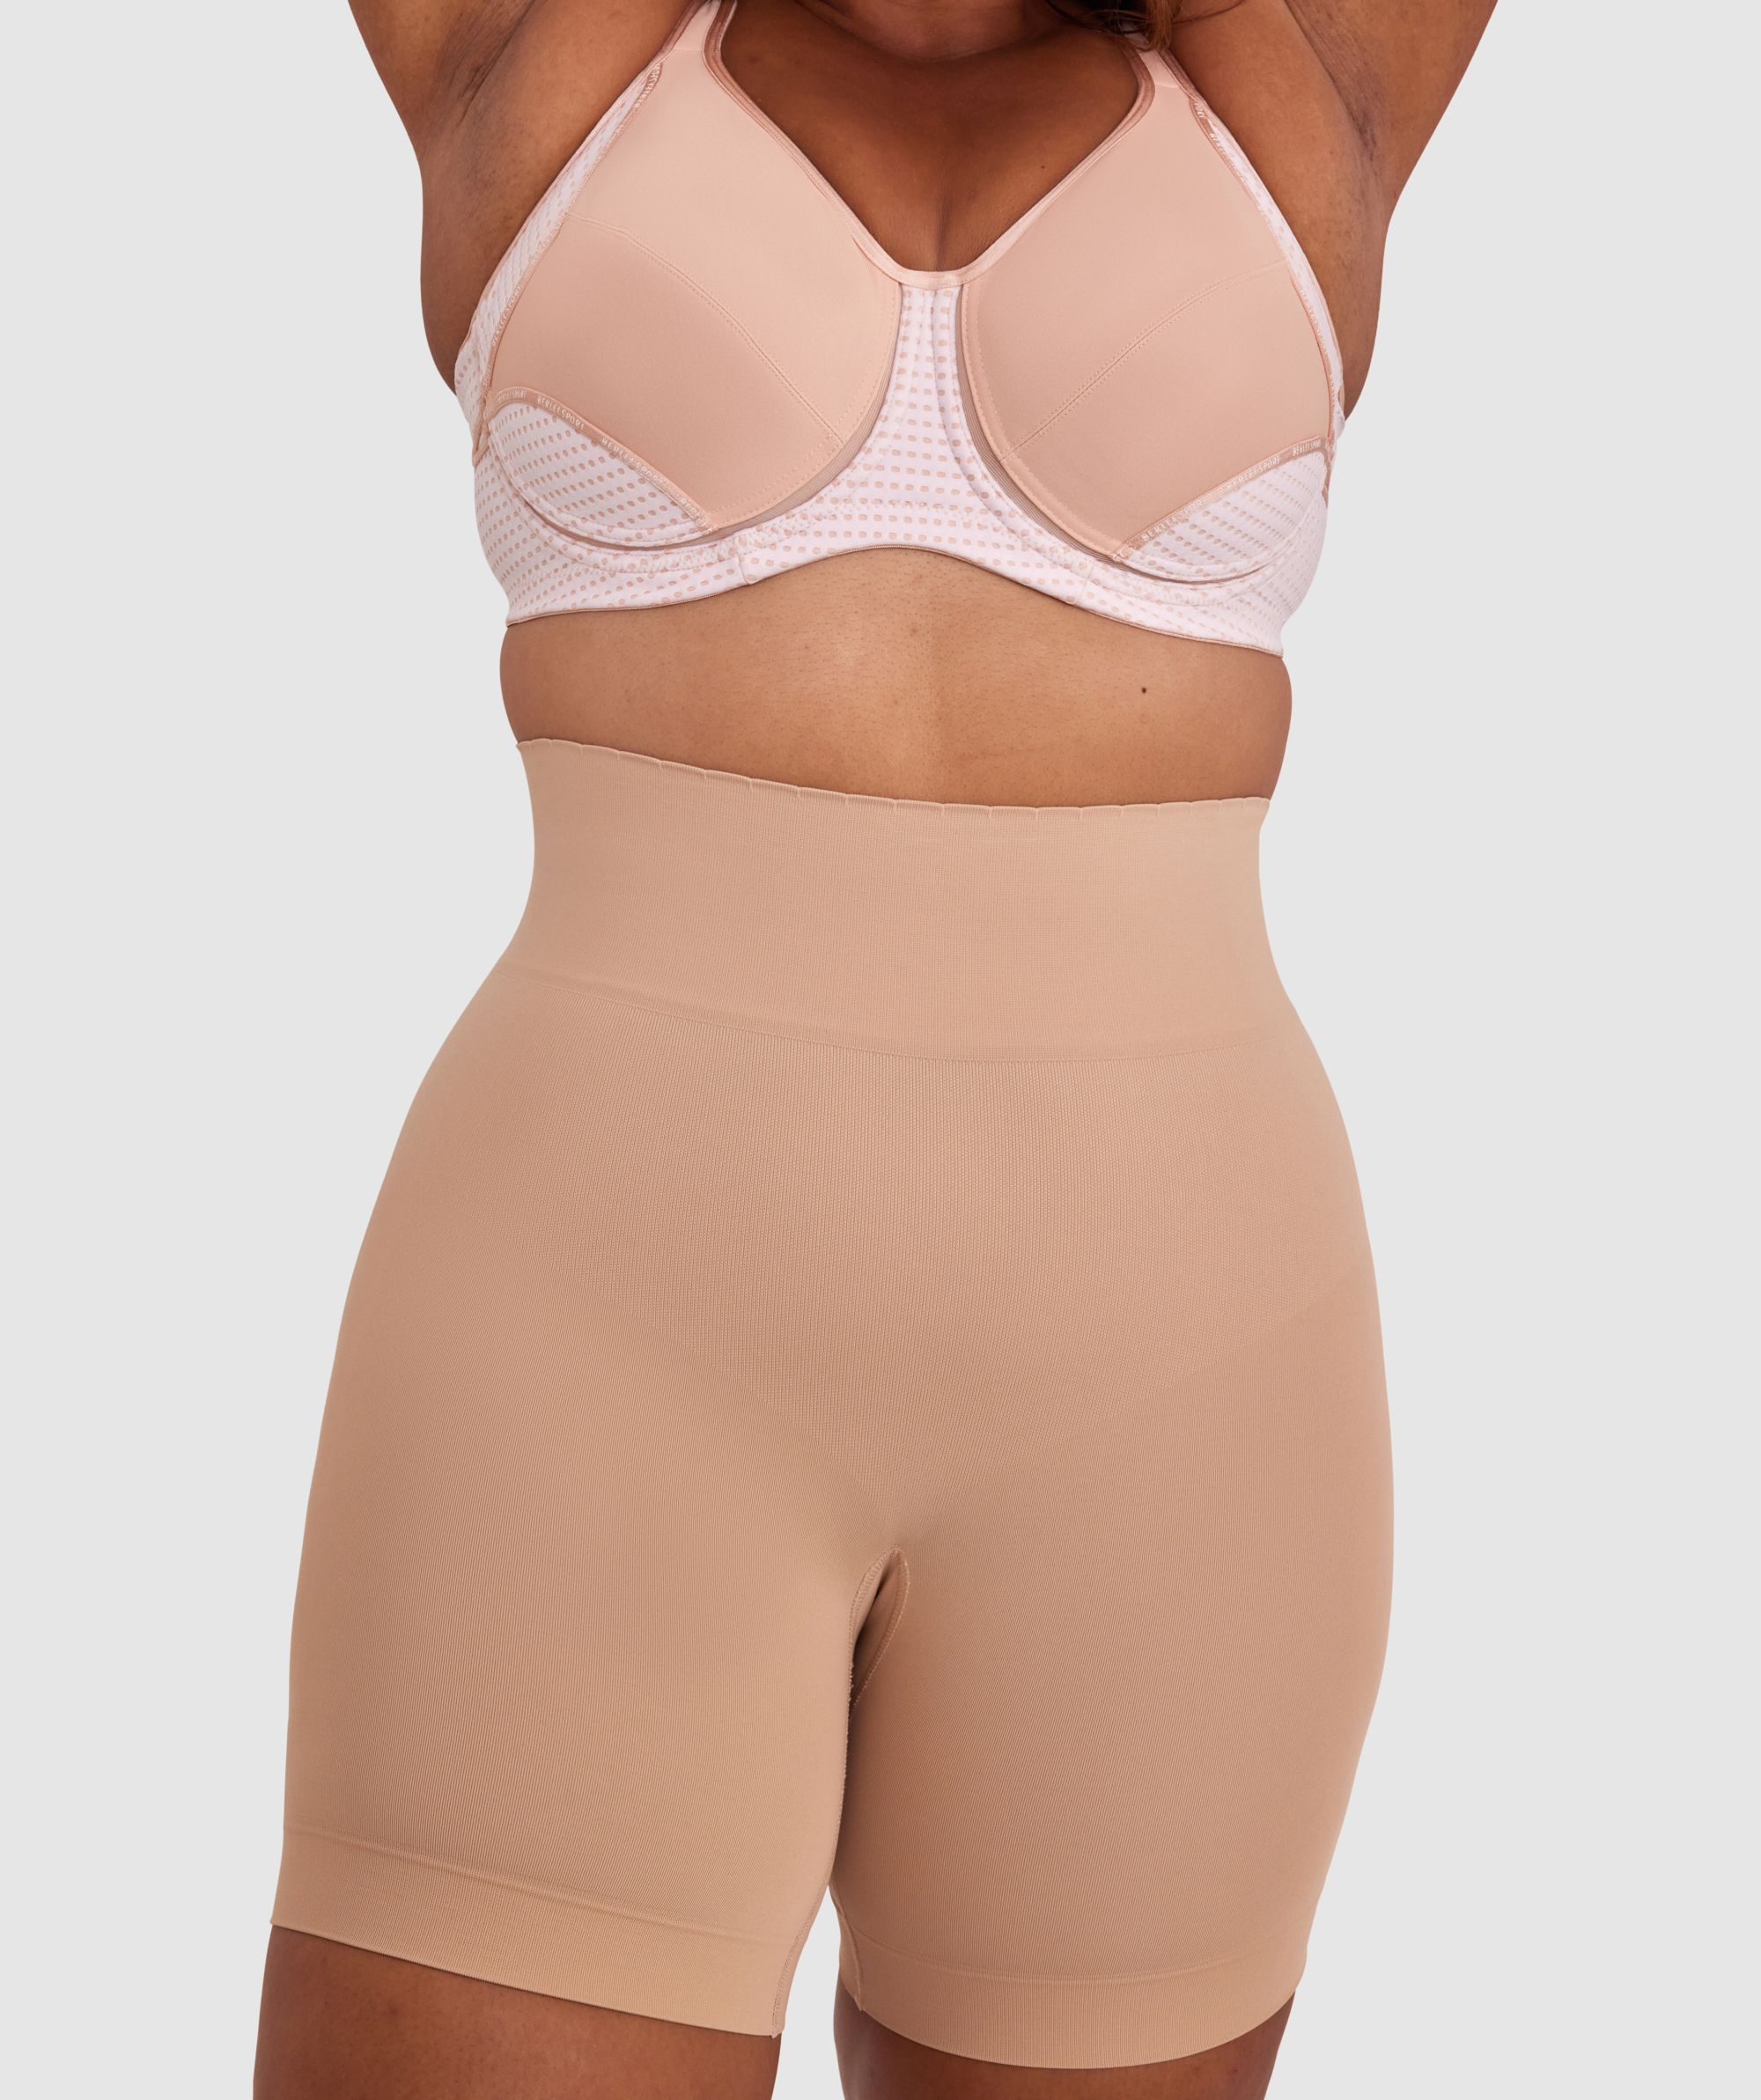 Buy Swee Fern High Waist And Short Thigh Shaper For Women - Nude Online